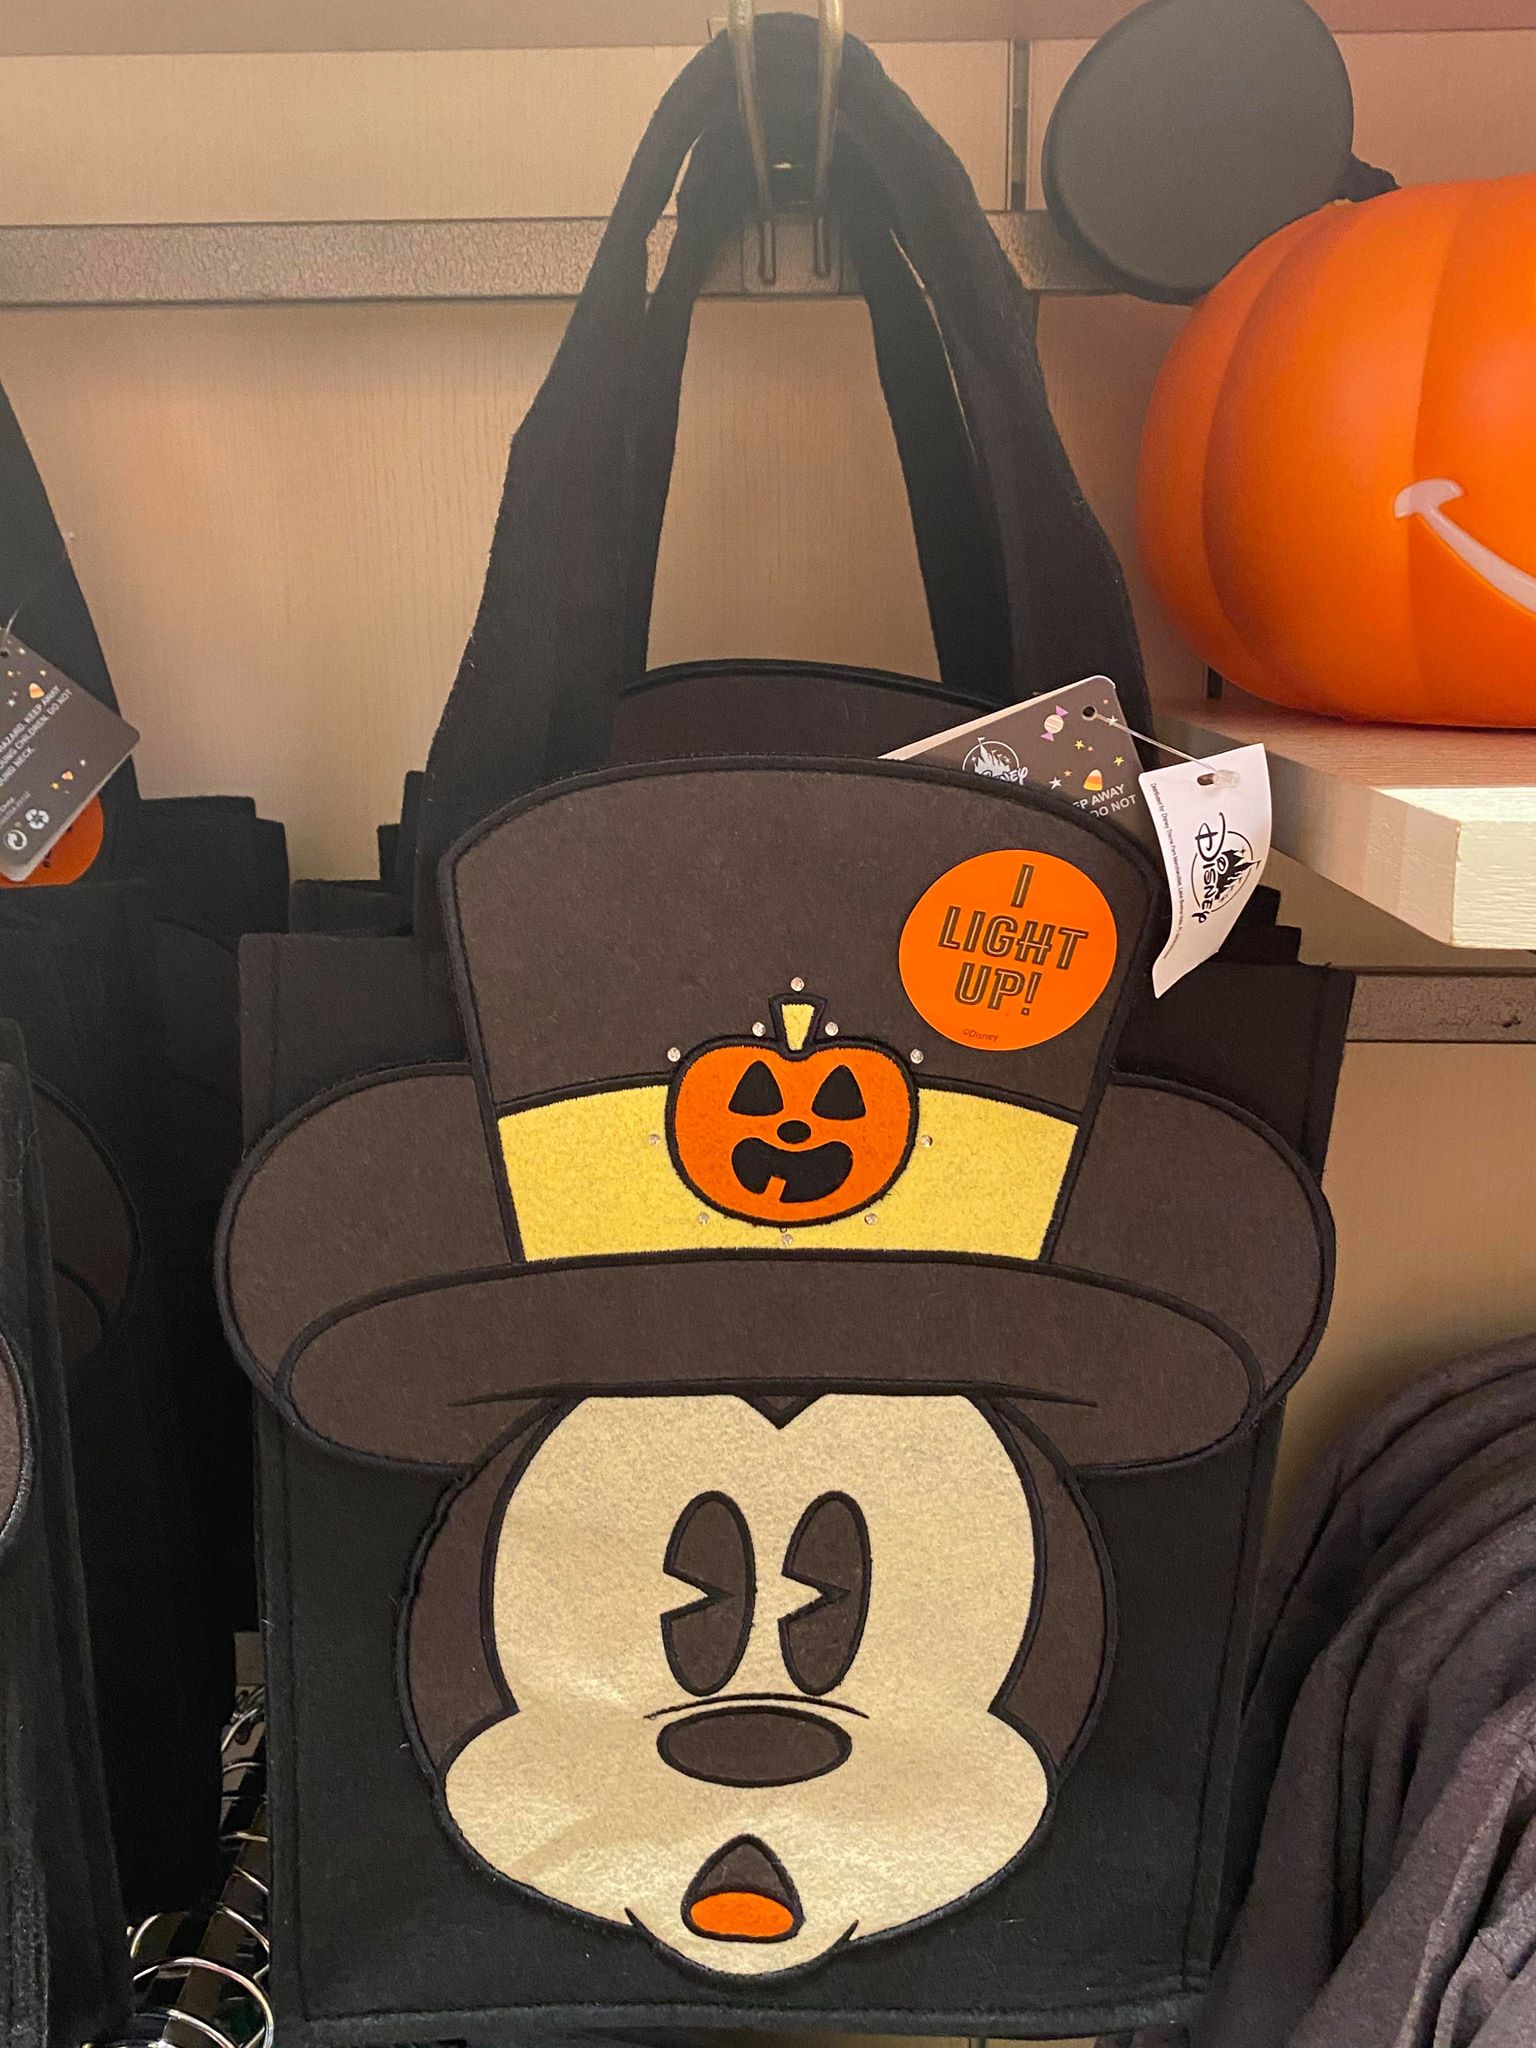 Check out these Spooktacular Halloween Bags and Totes at World of